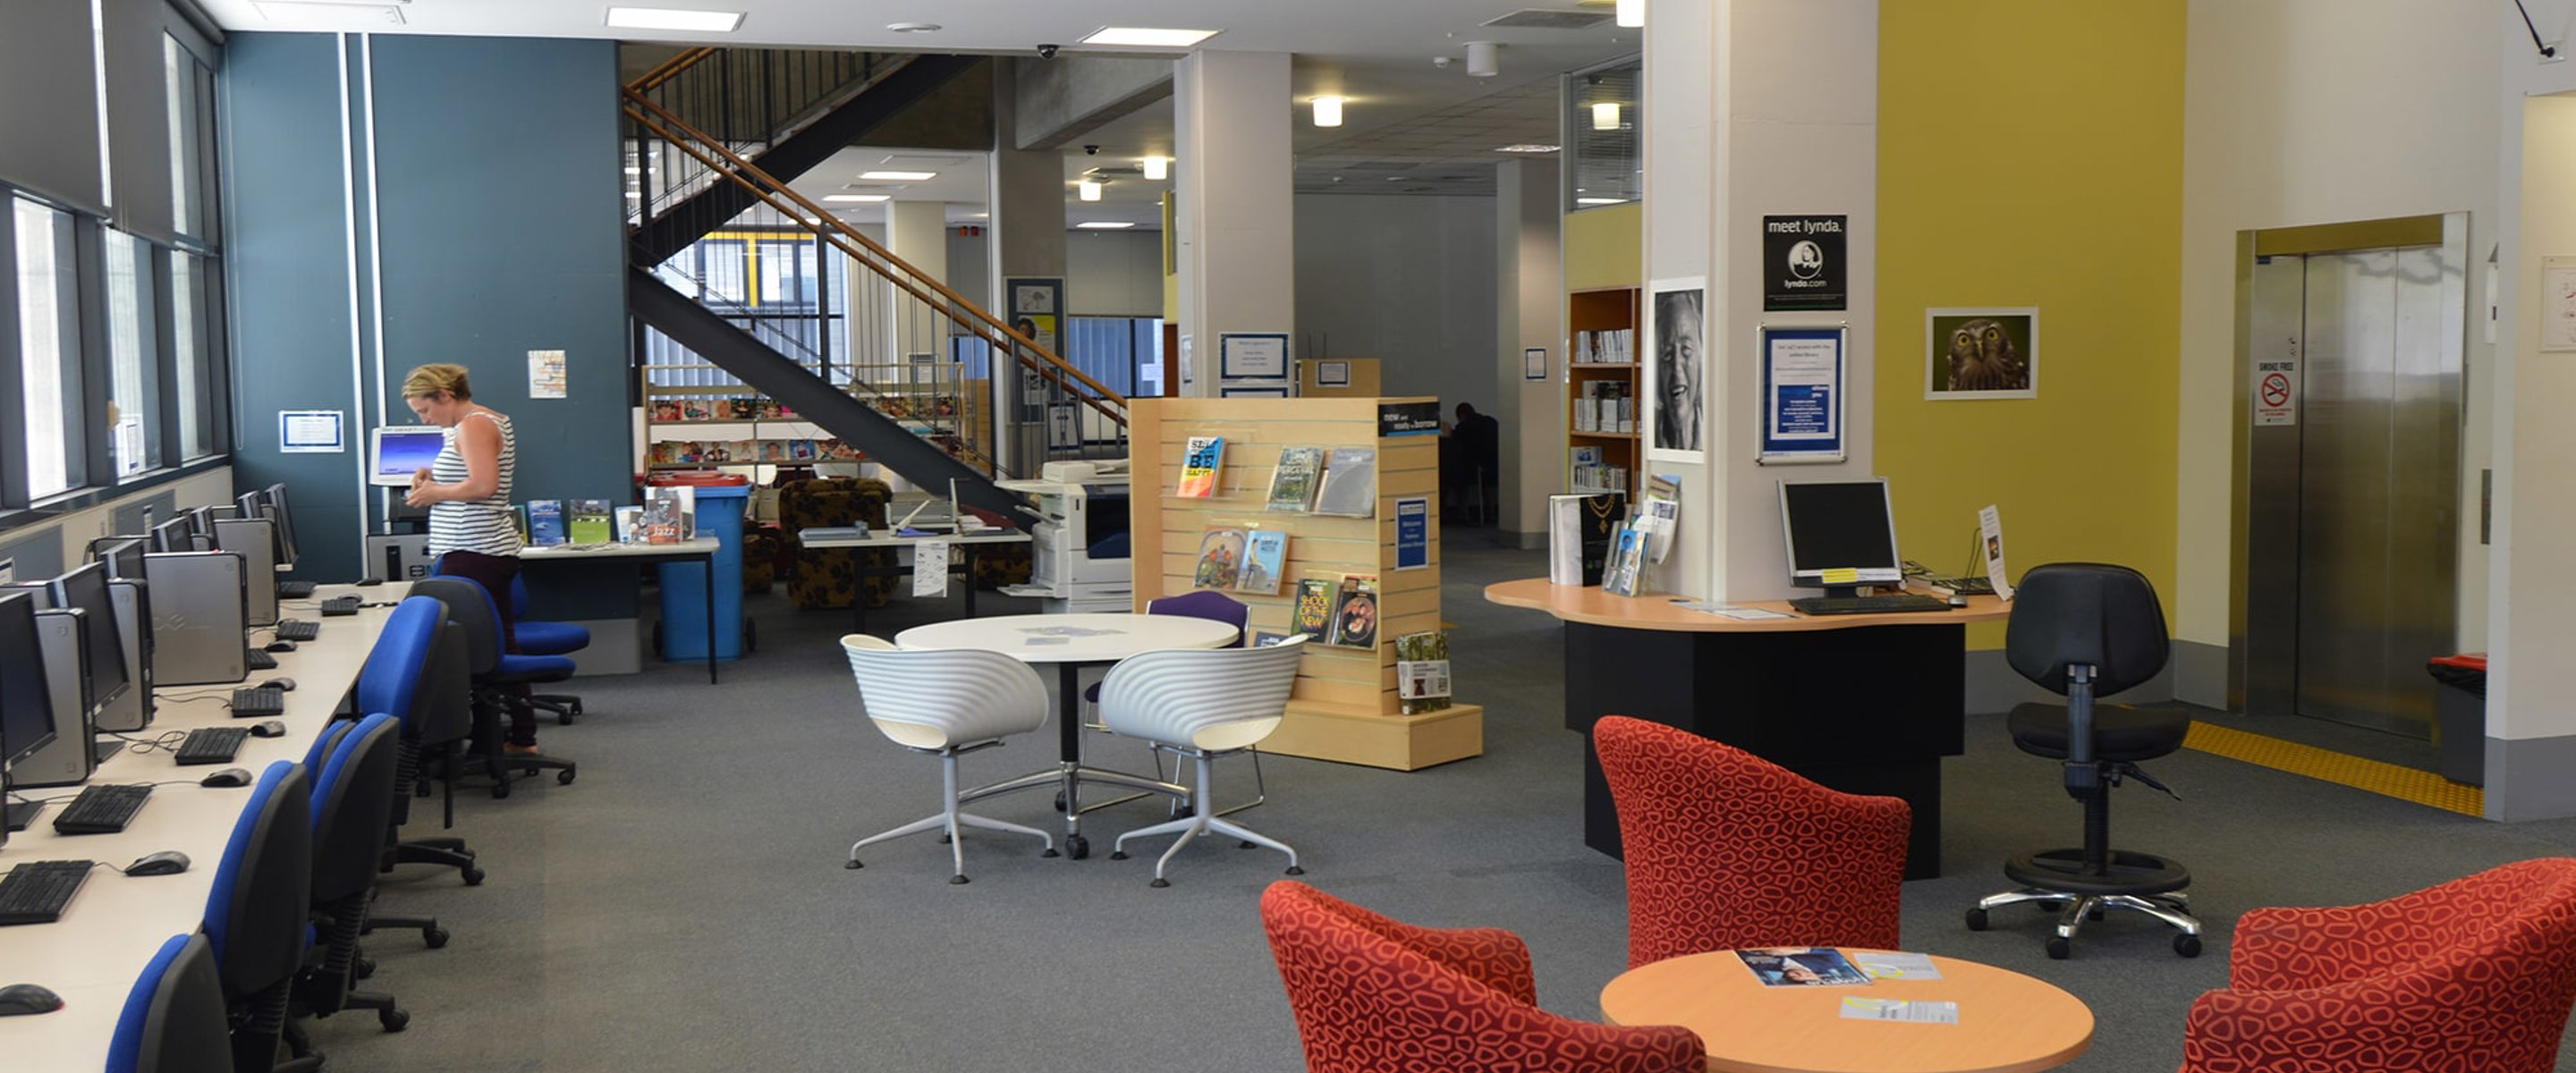 Work stations and meeting tables inside Melbourne Polytechnic's Prahan library